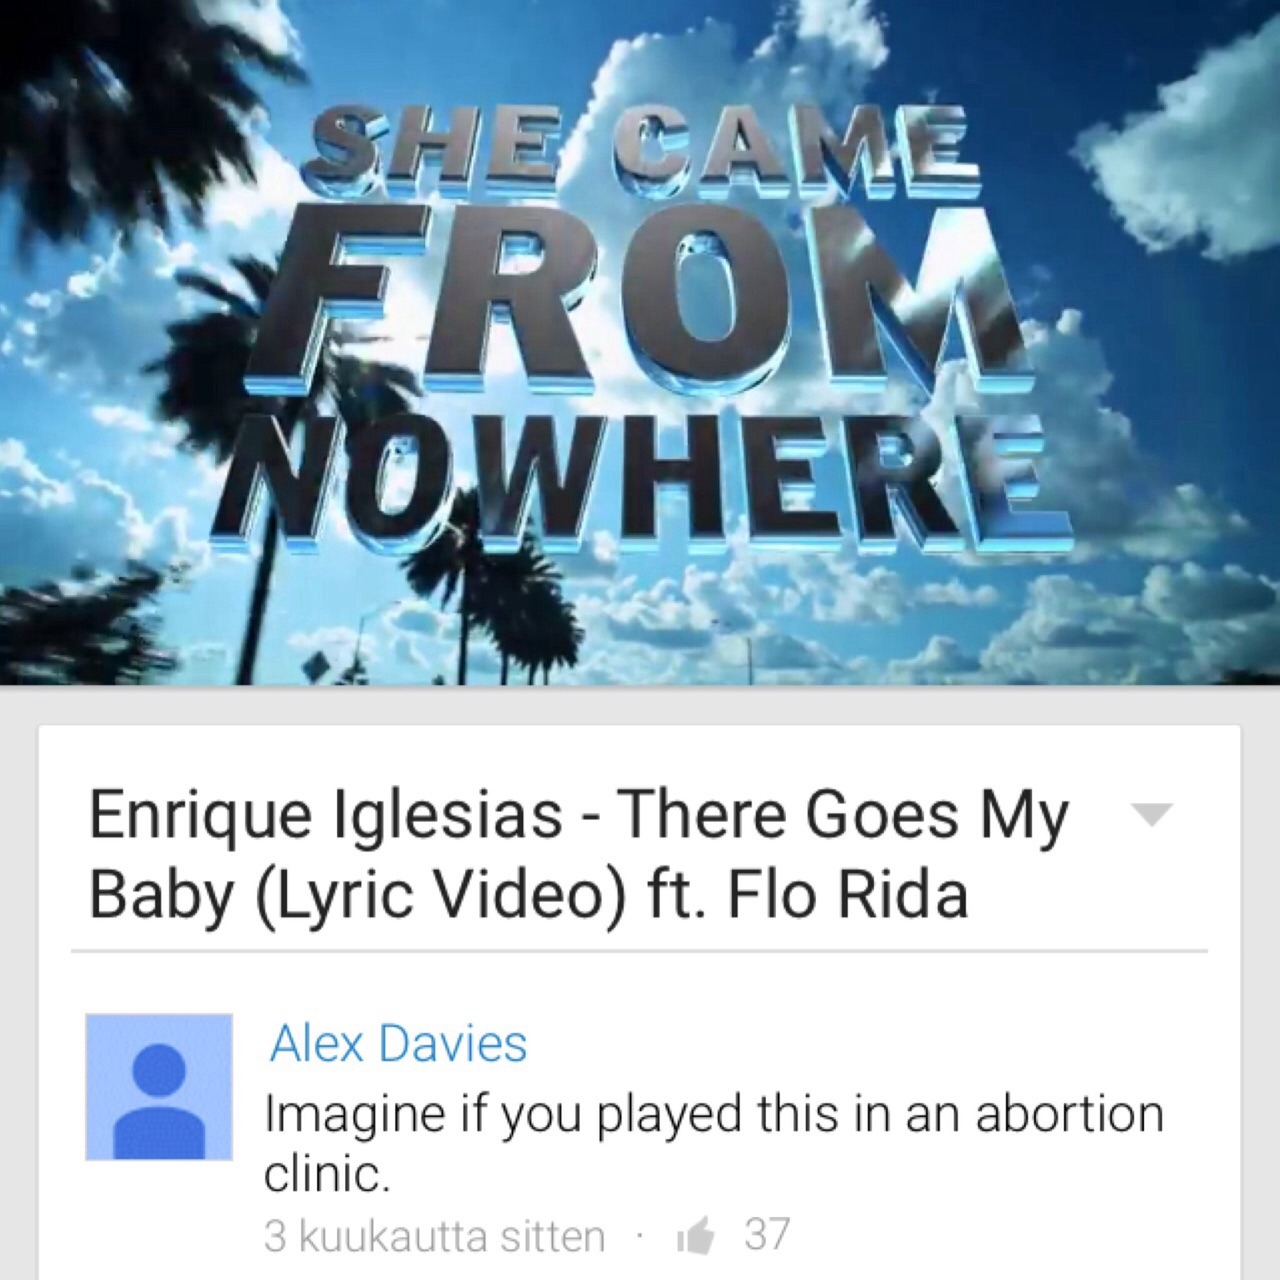 Third comment has done an abortion - meme